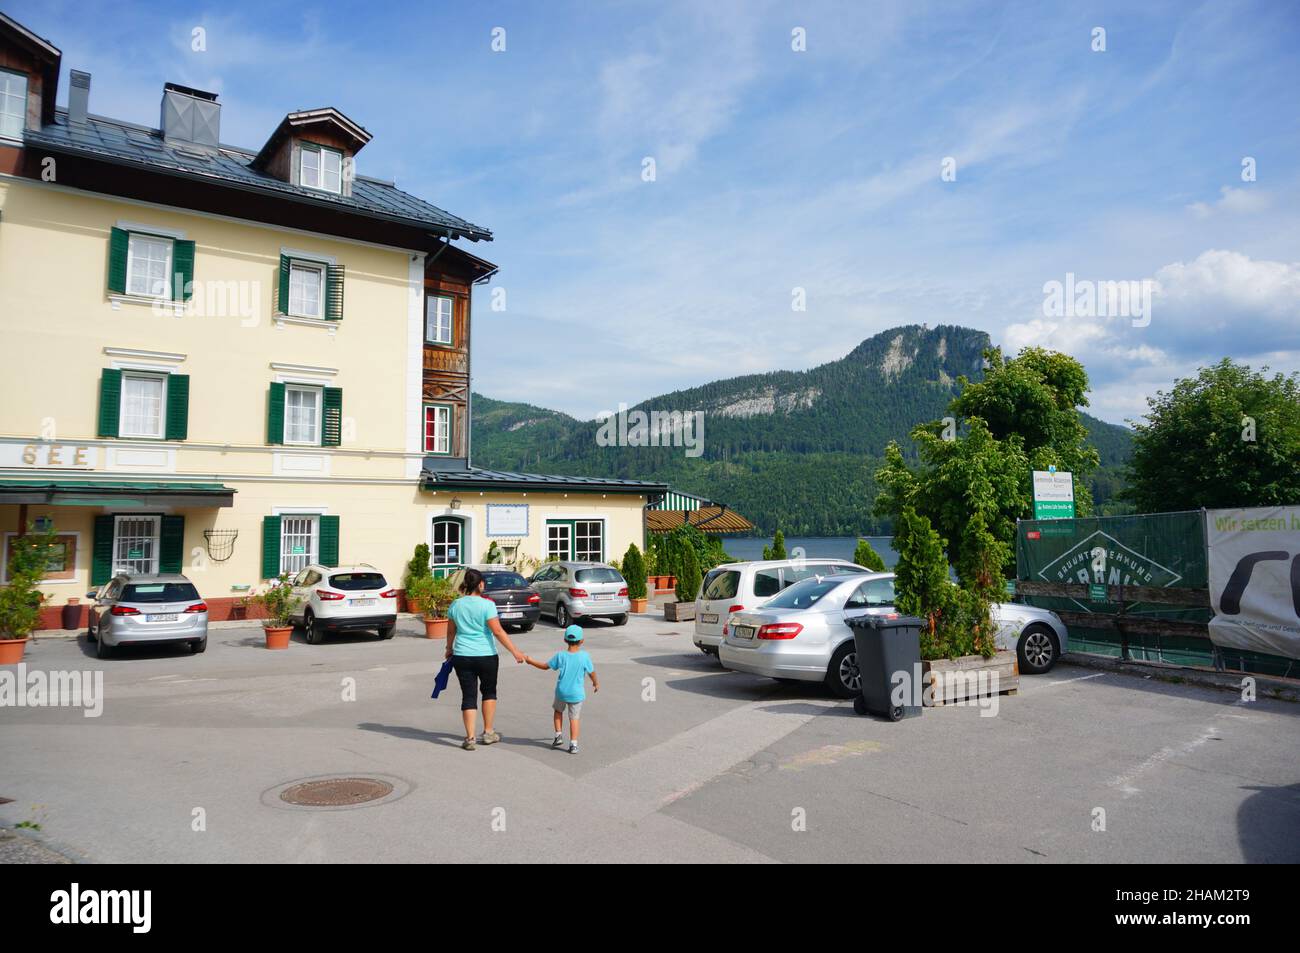 AULTAUSSEE, AUSTRIA - Nov 07, 2021: The woman and child walking close by a hotel and lake. Aultaussee, Austria Stock Photo